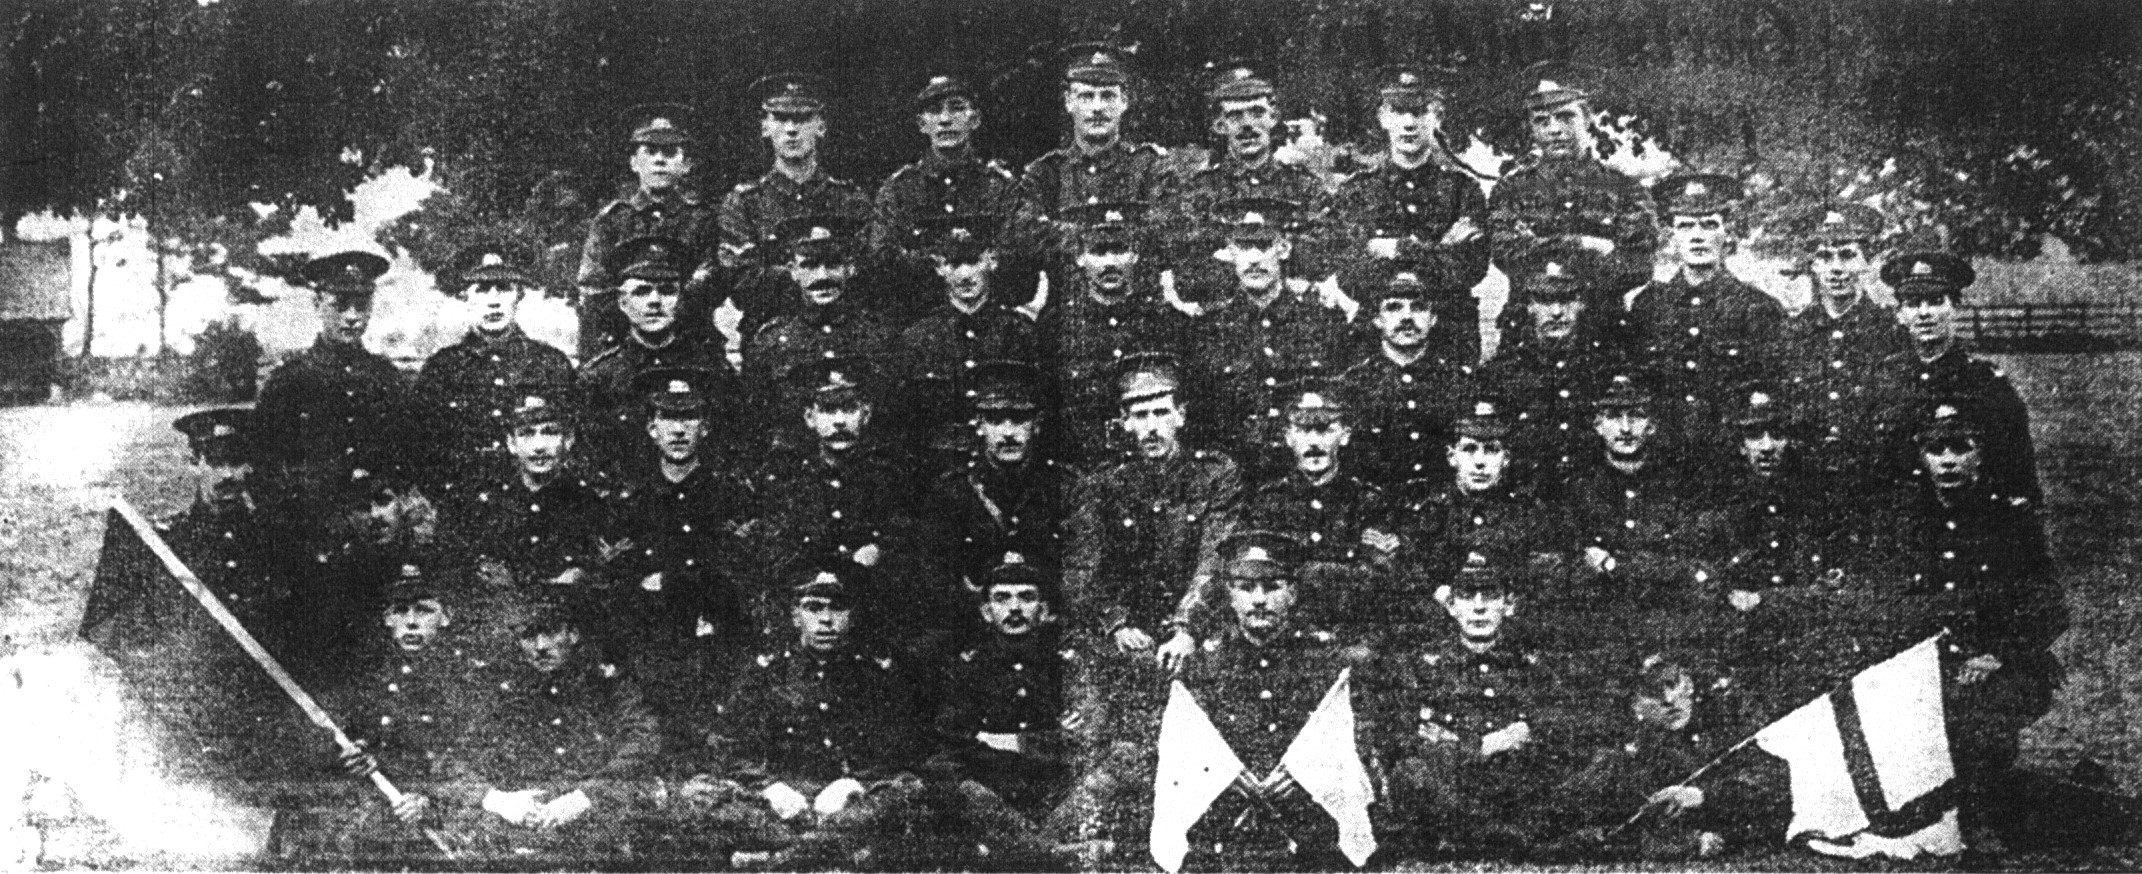 TOGETHER: Members of the Kings Own TA (Dalton and Askam) in camp at Milly Bridge Farm in training before 1915. Back row left to right: S. Wells, J. Charnock, M. Benson, J. Riley, P. Roberts, H. Riley, J. Gill. Second from top: F. Burns, T. Golf, T. Crossl